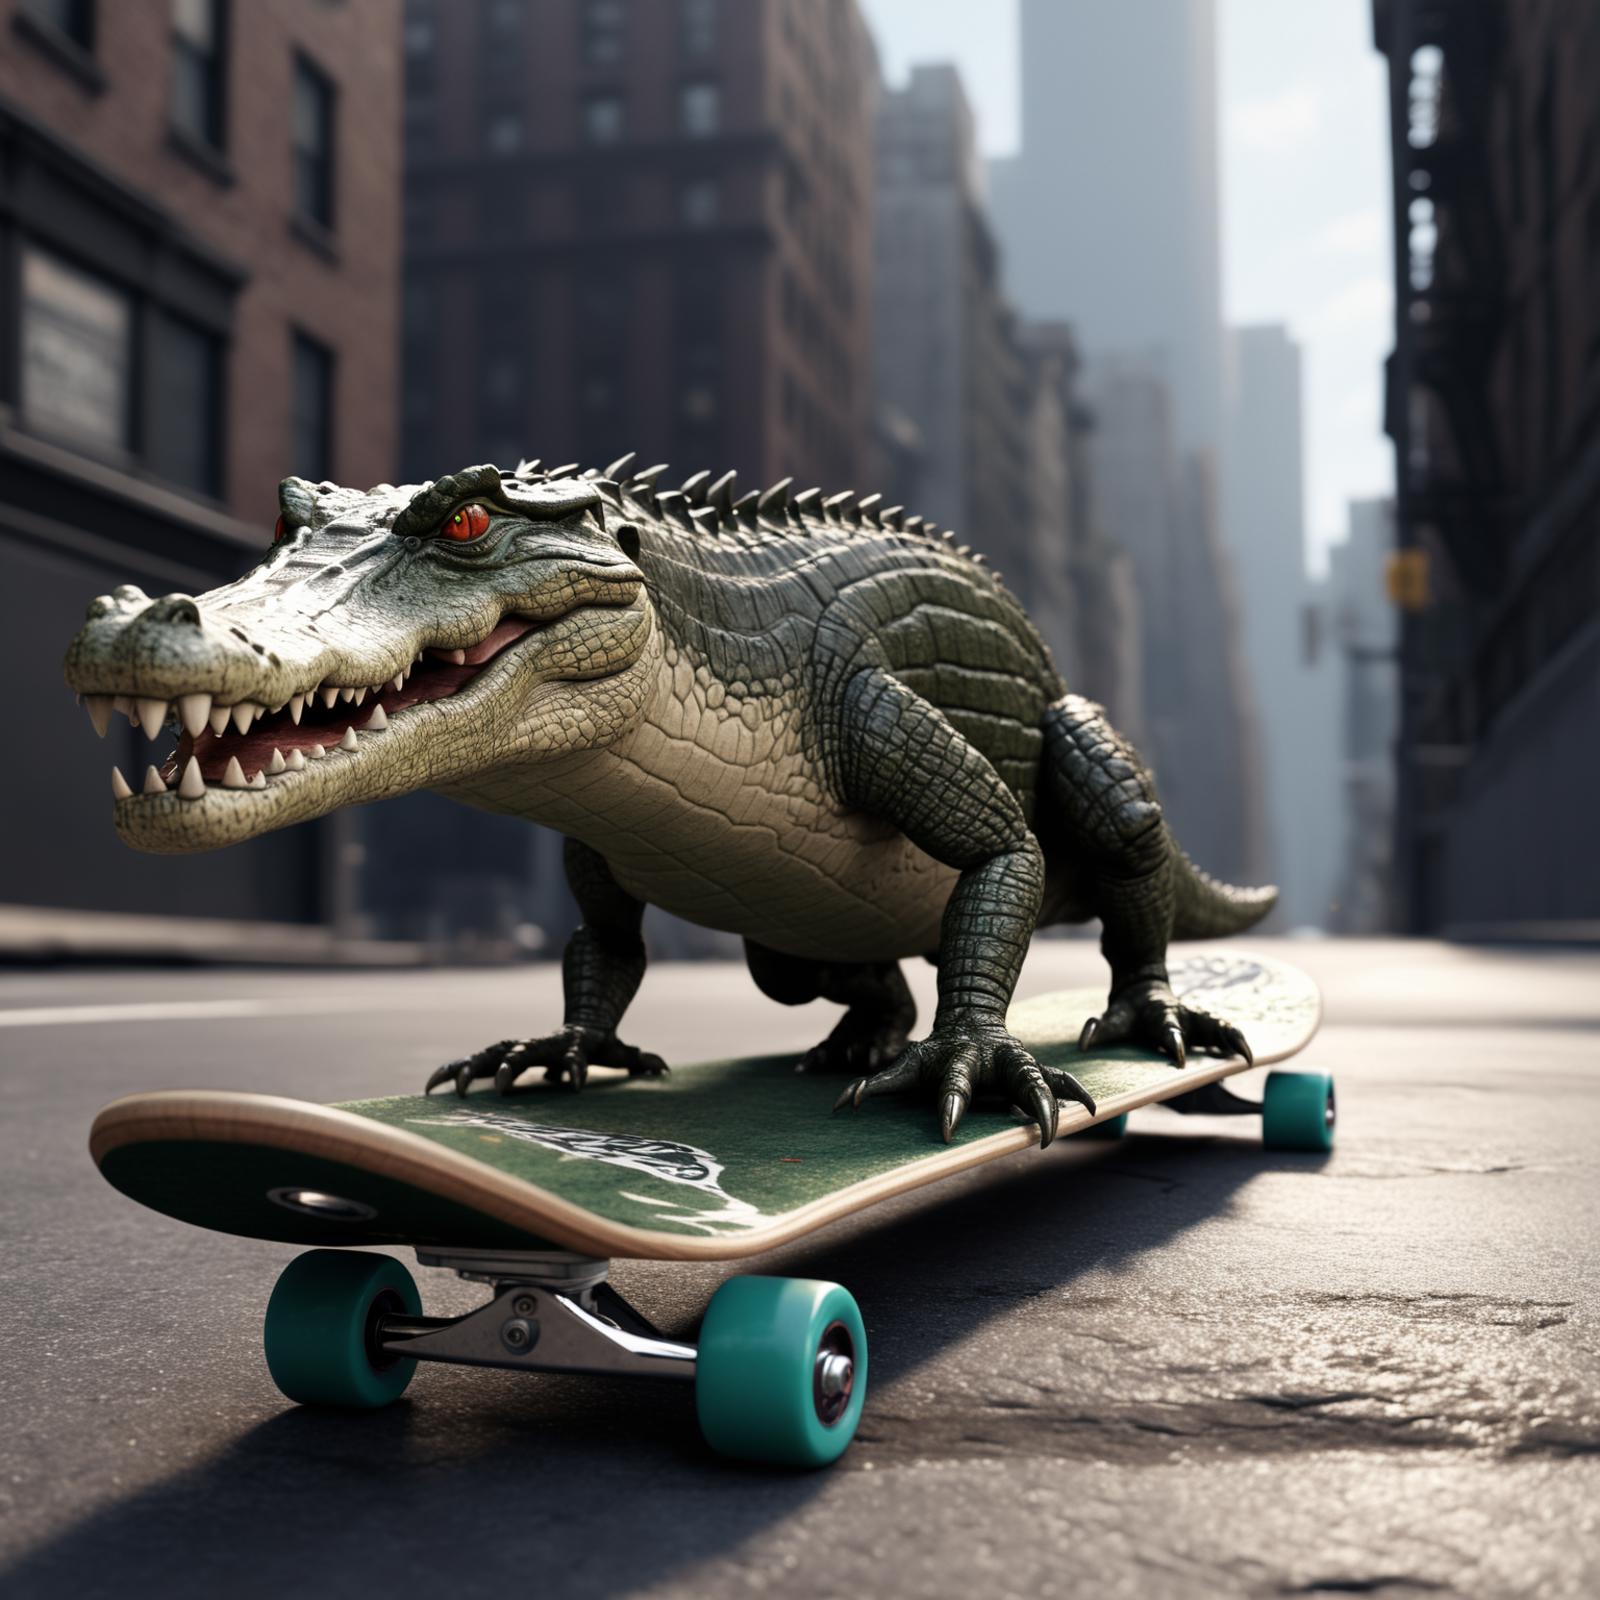 Green skateboard with a large alligator on top of it.